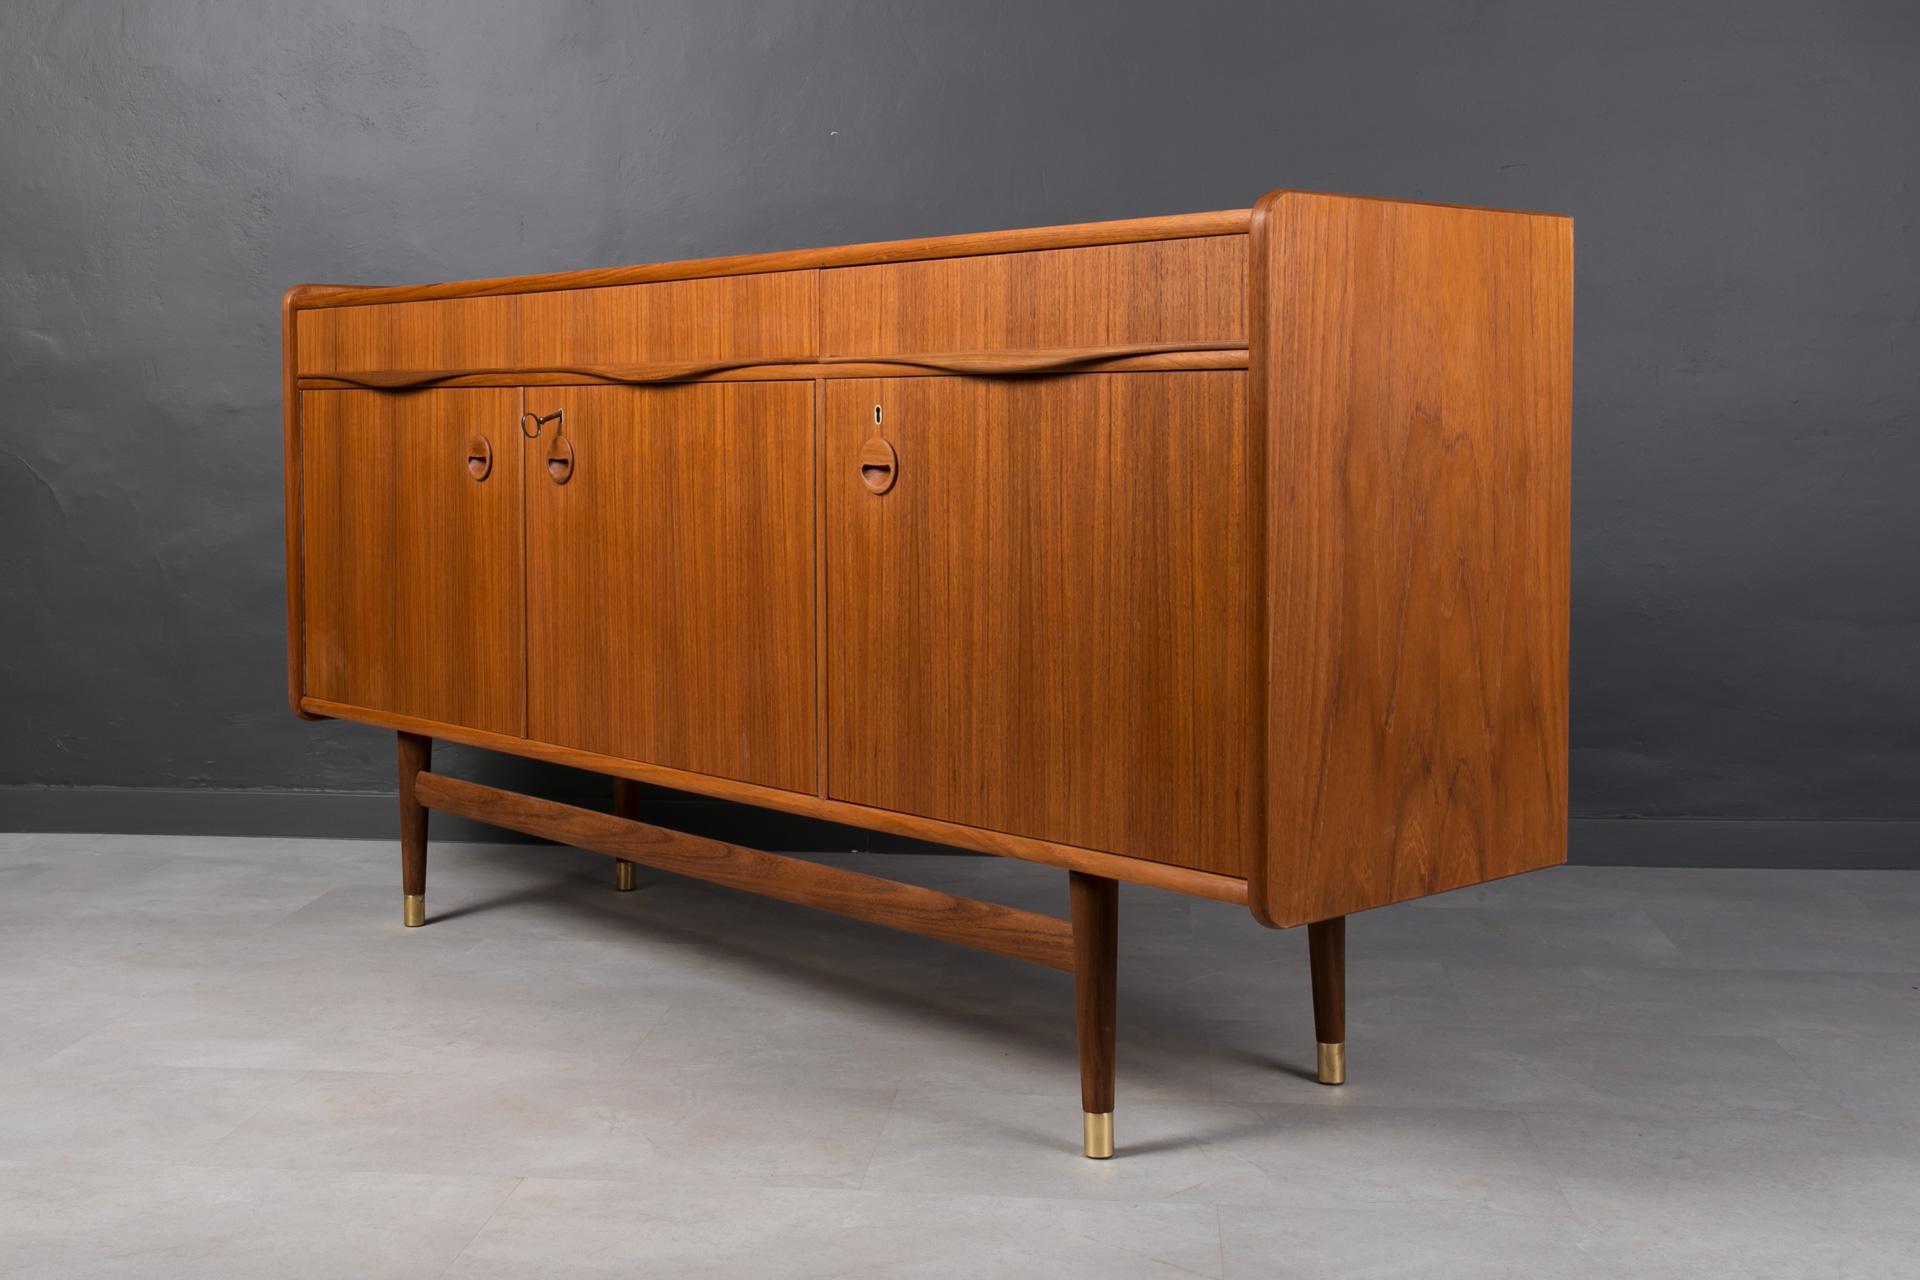 Midcentury Sideboard, Teak Wood and Brass Details, Norway, 1960s In Good Condition In Wrocław, Poland